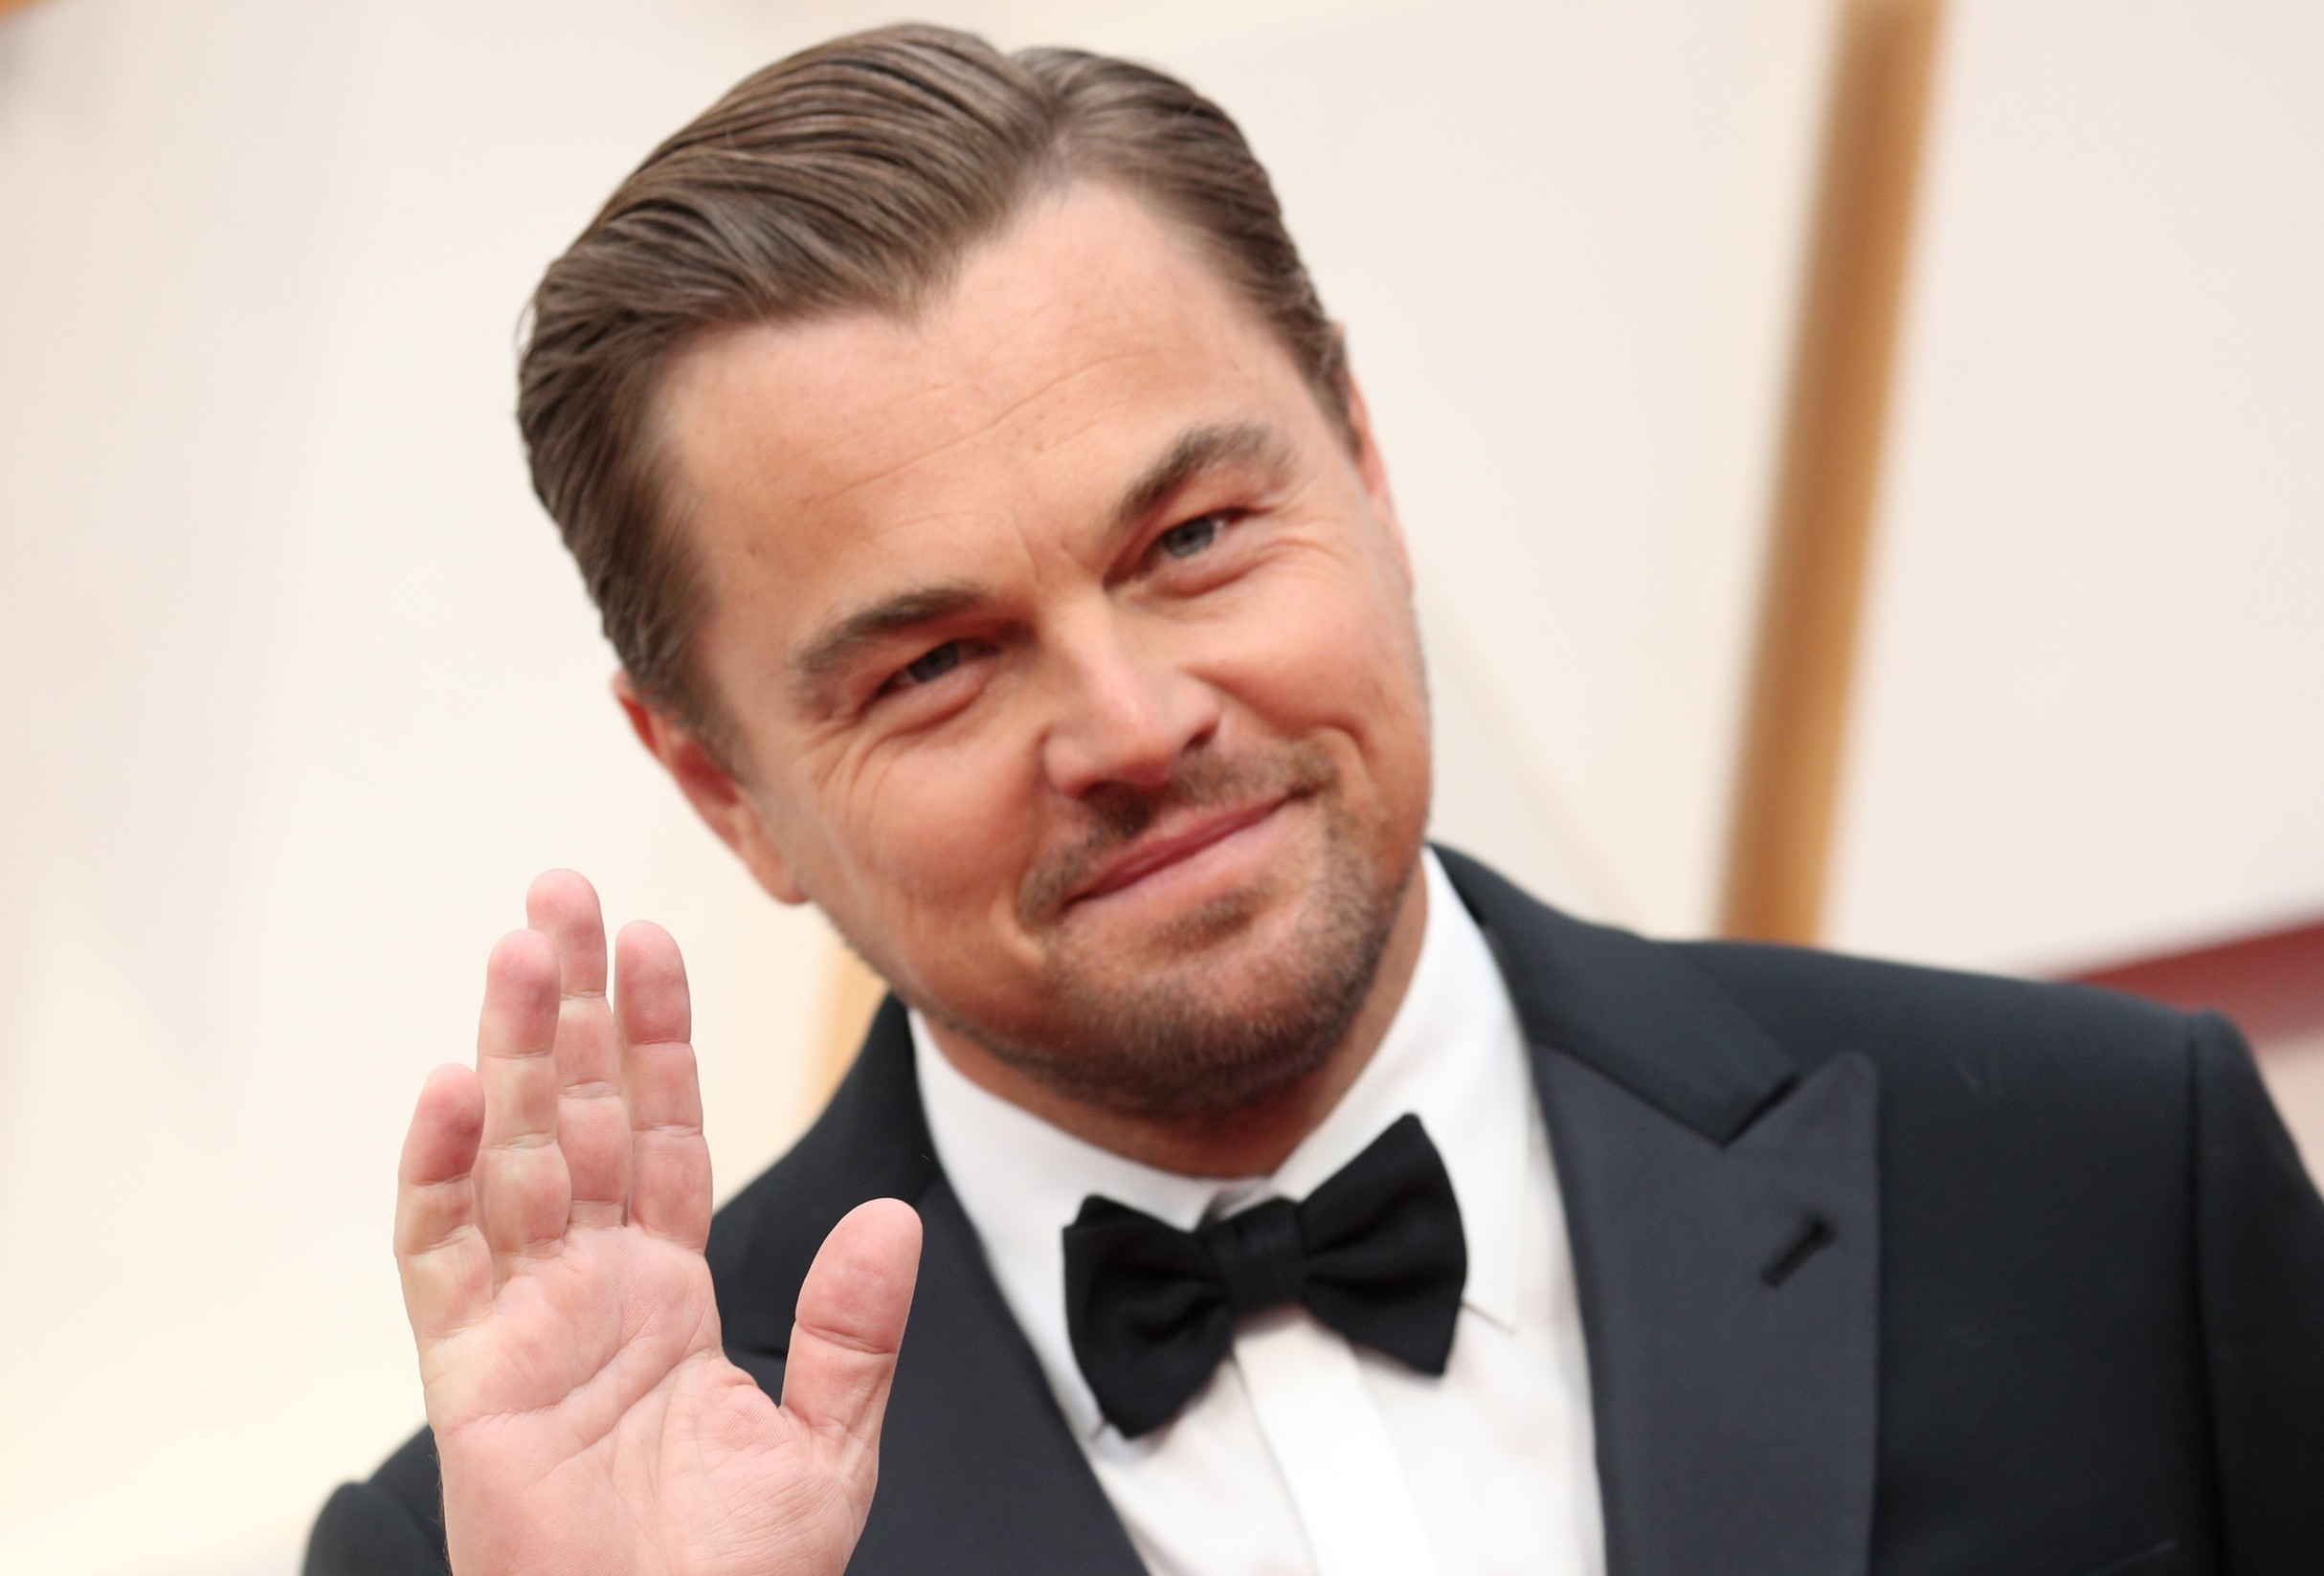 Leonardo DiCaprio
92nd Annual Academy Awards, Arrivals, Los Angeles, USA - 09 Feb 2020, Image: 497594525, License: Rights-managed, Restrictions: , Model Release: no, Credit line: John Salangsang/BEI / Shutterstock Editorial / Profimedia